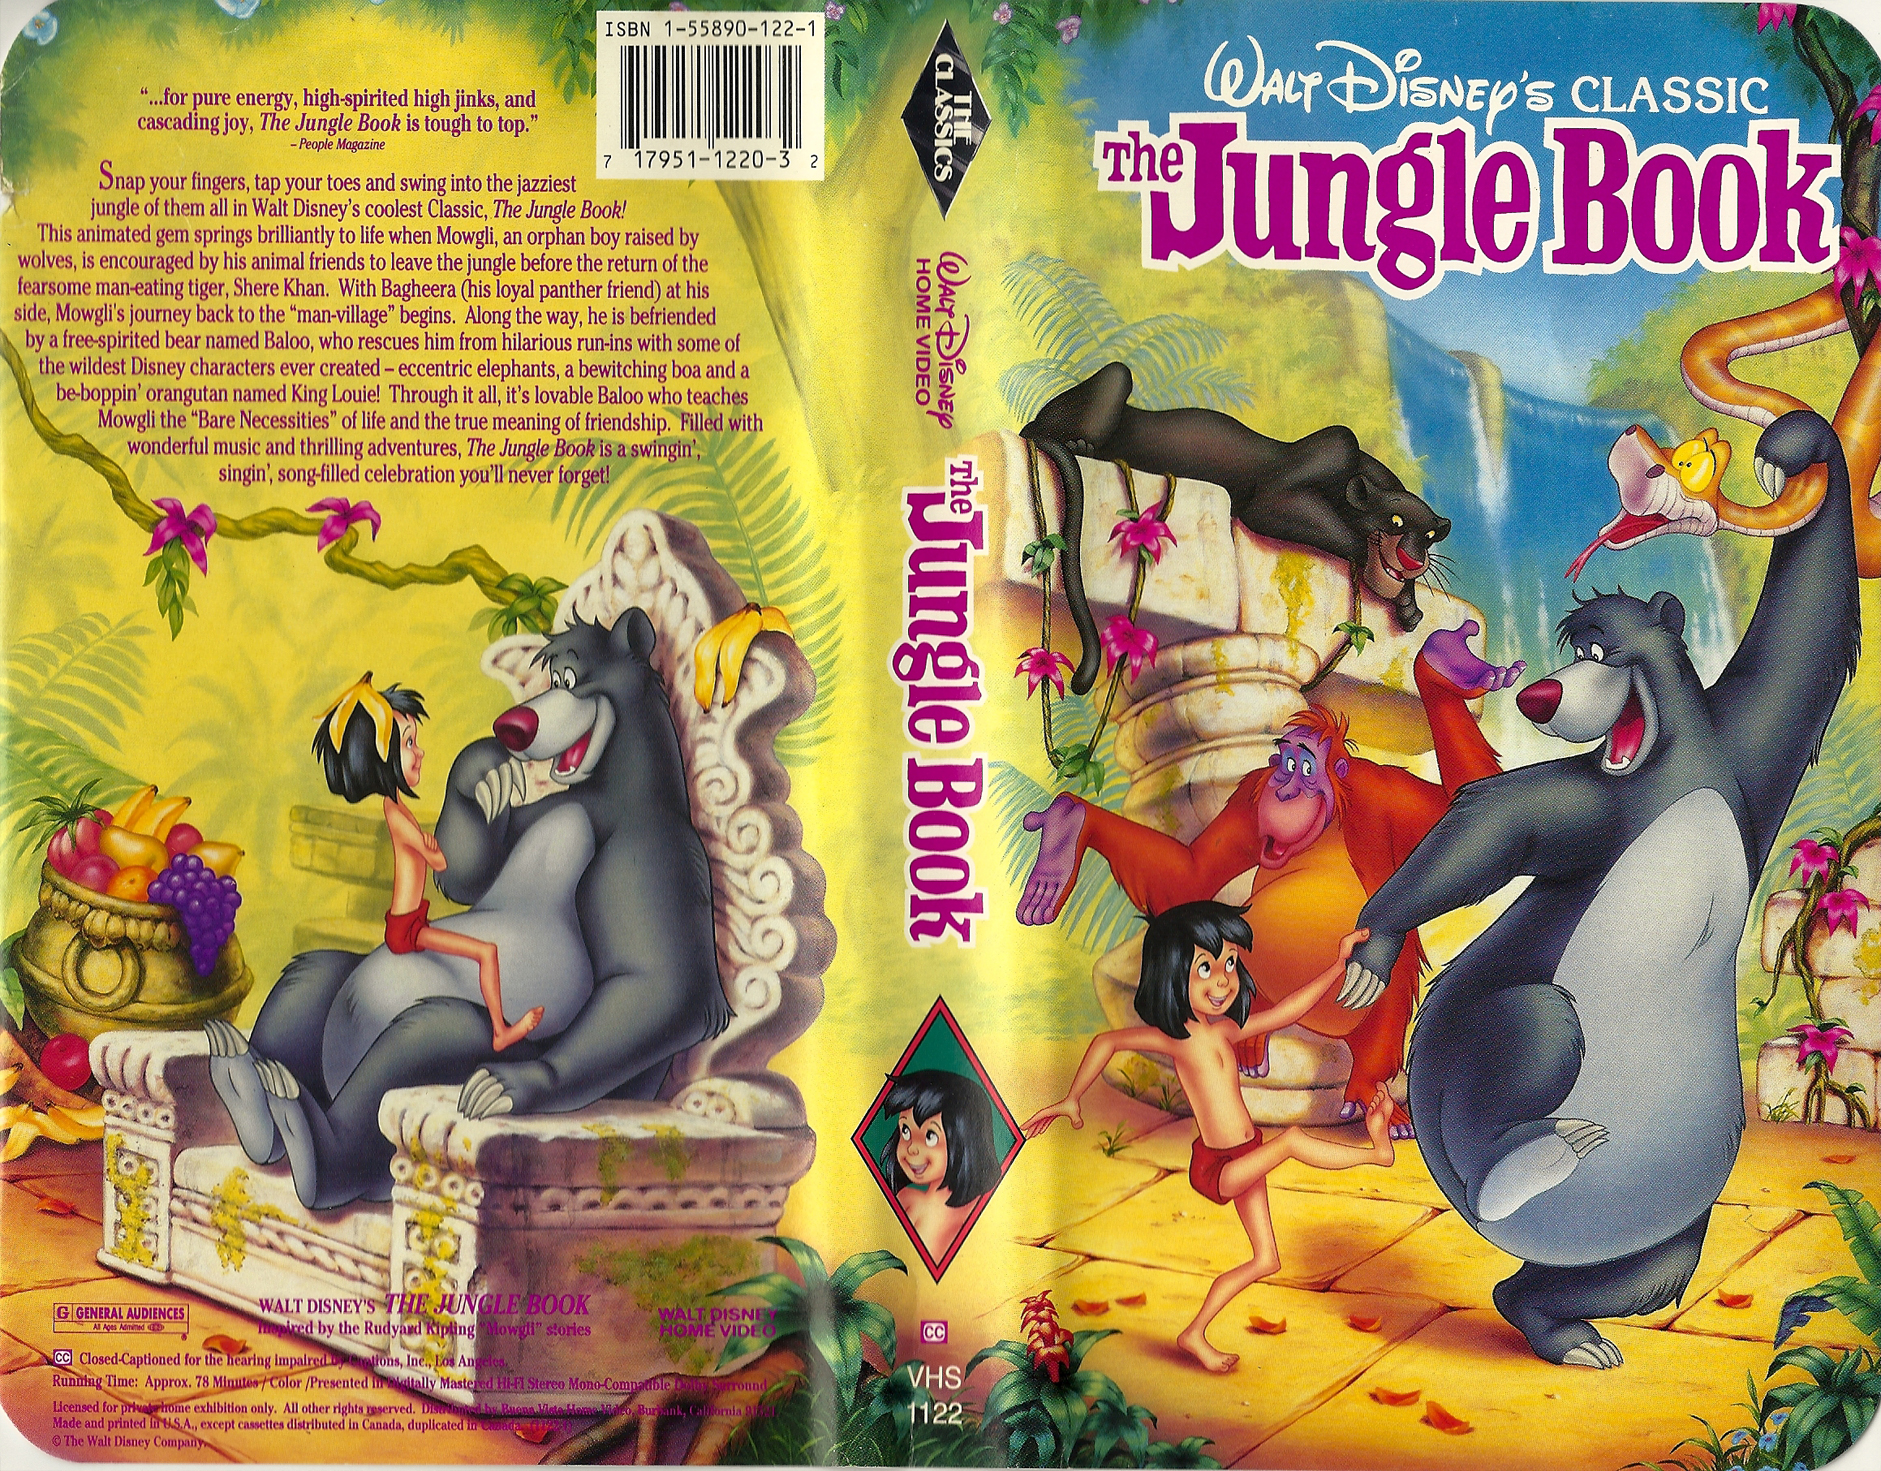 May 19 2011 VHS cover scan - click for high res version the jungle book.